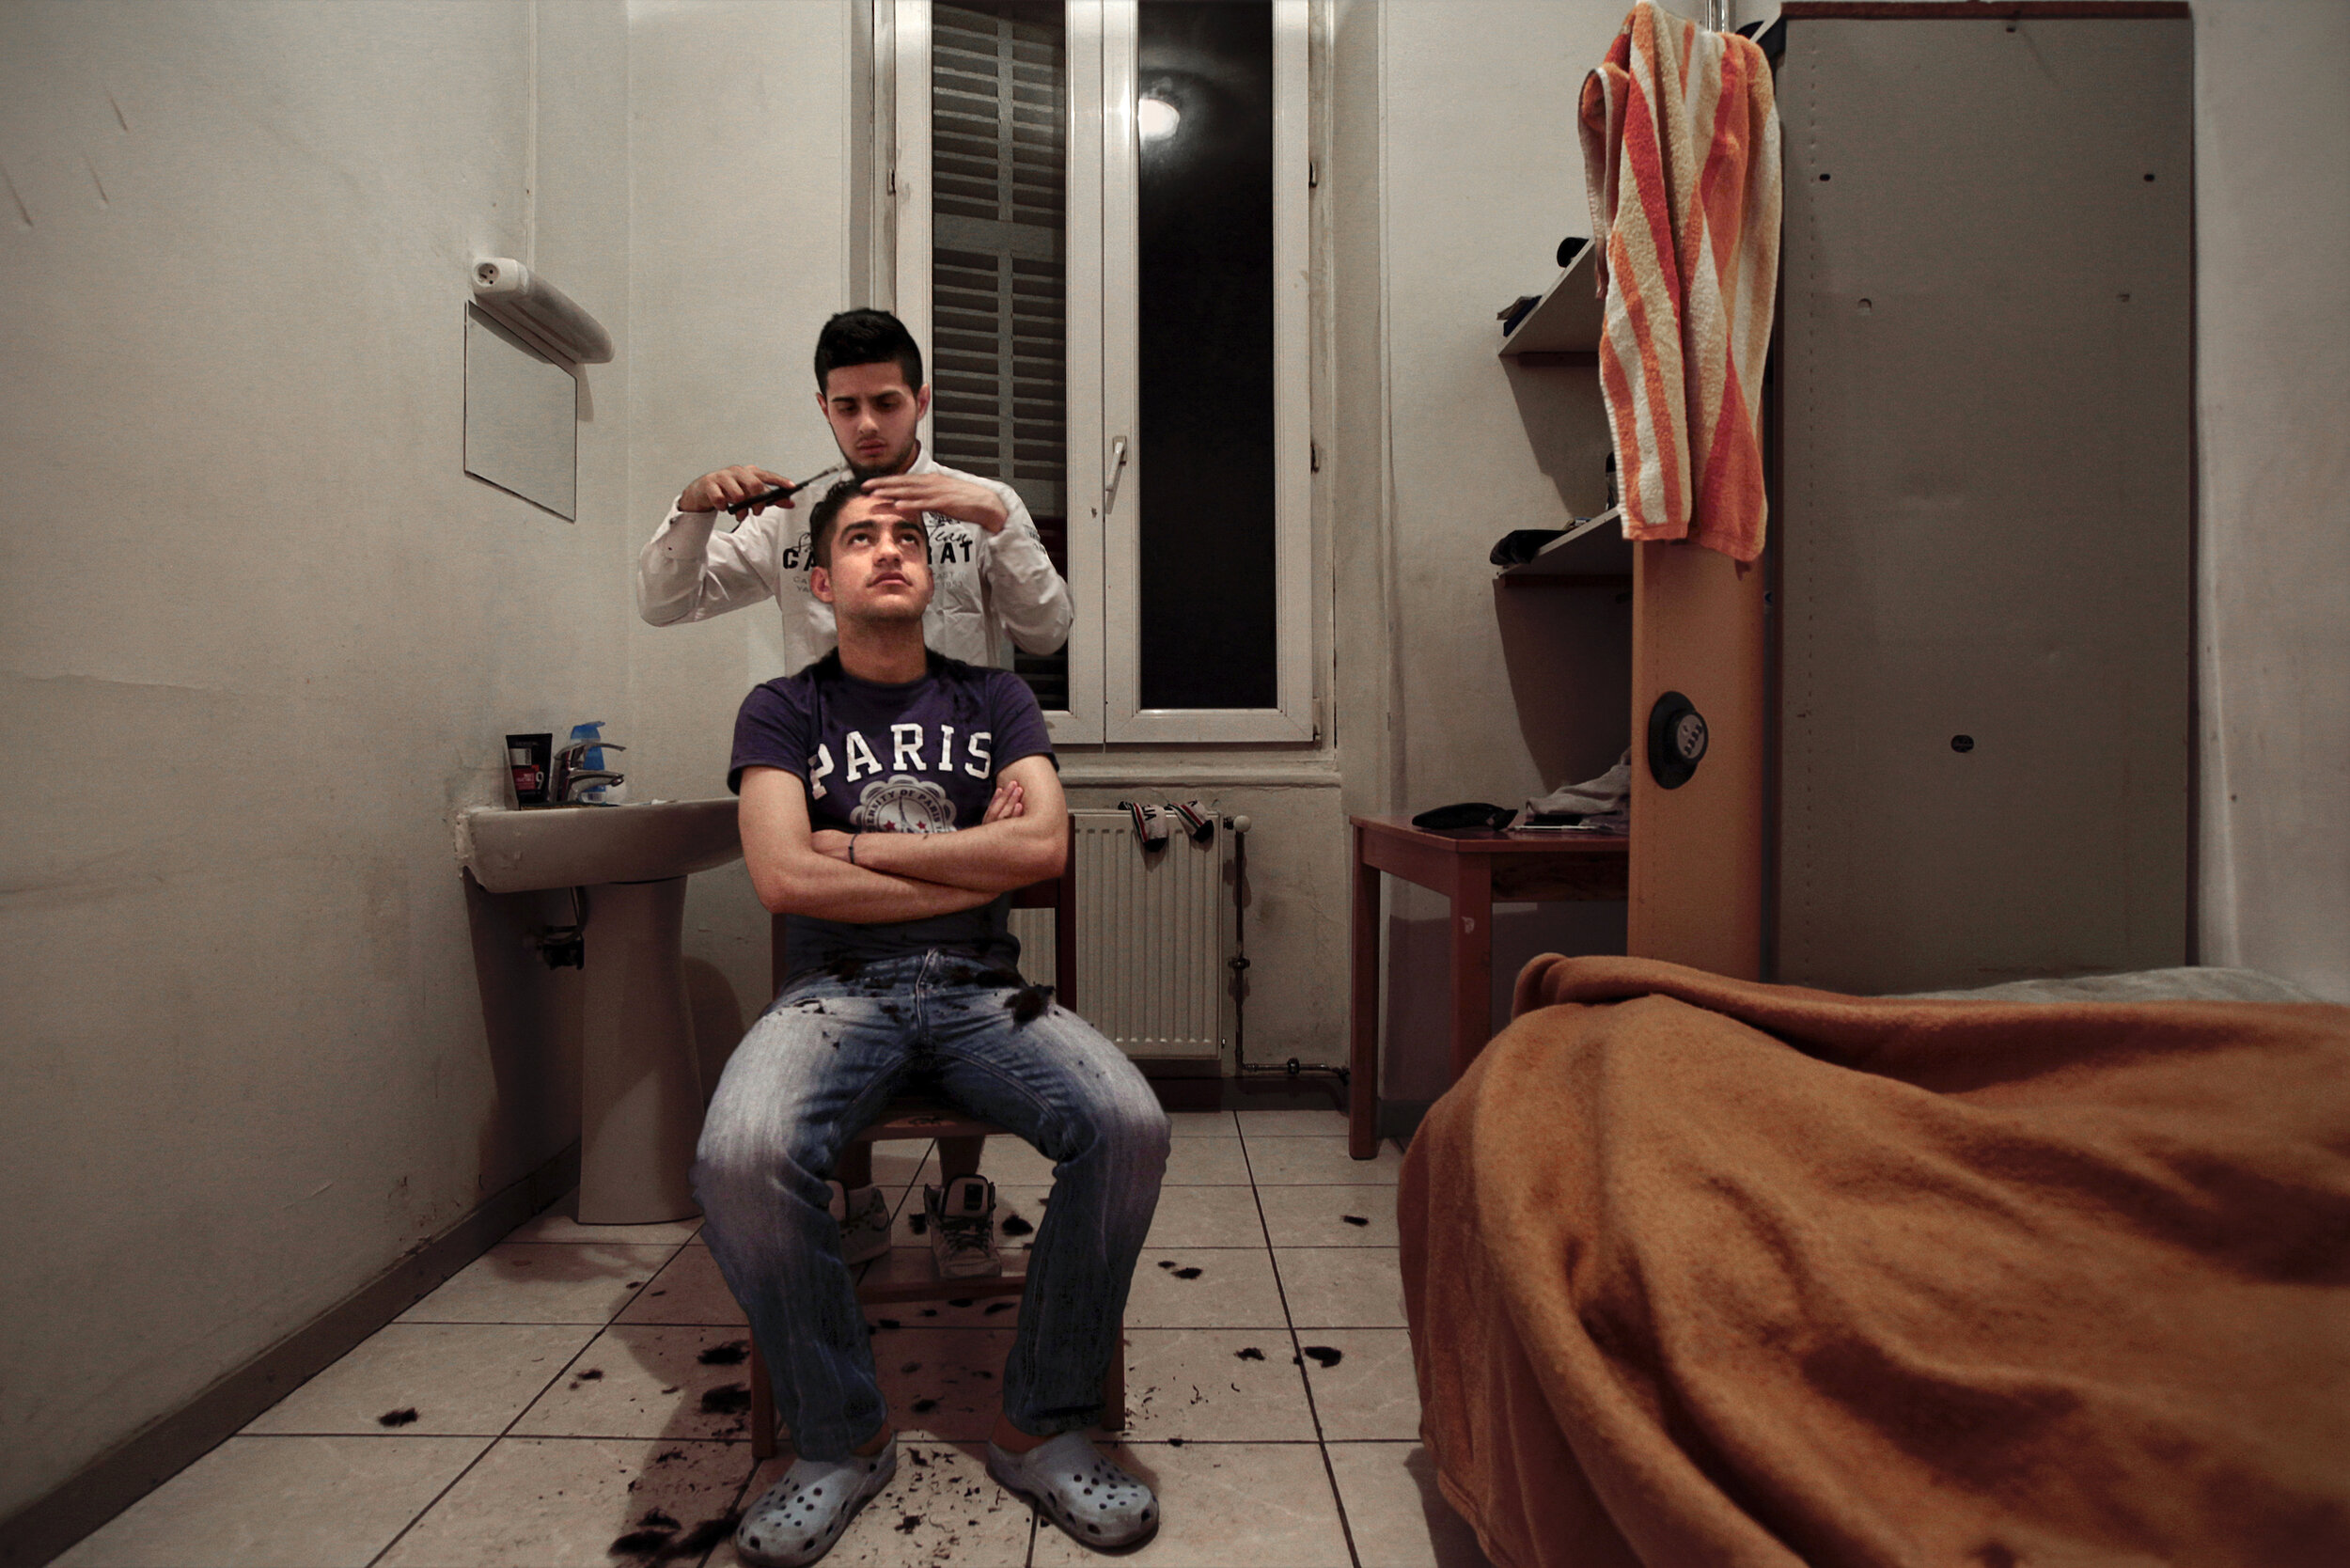   France. Marseille. 2014. Inside his small room in a shelter for homeless young men, Daniel (standing), 19, gives a haircut to his friend, Mohamed Chérif Spiga. Daniel dreams of becoming a hairstylist and provides his services free of cost to all th